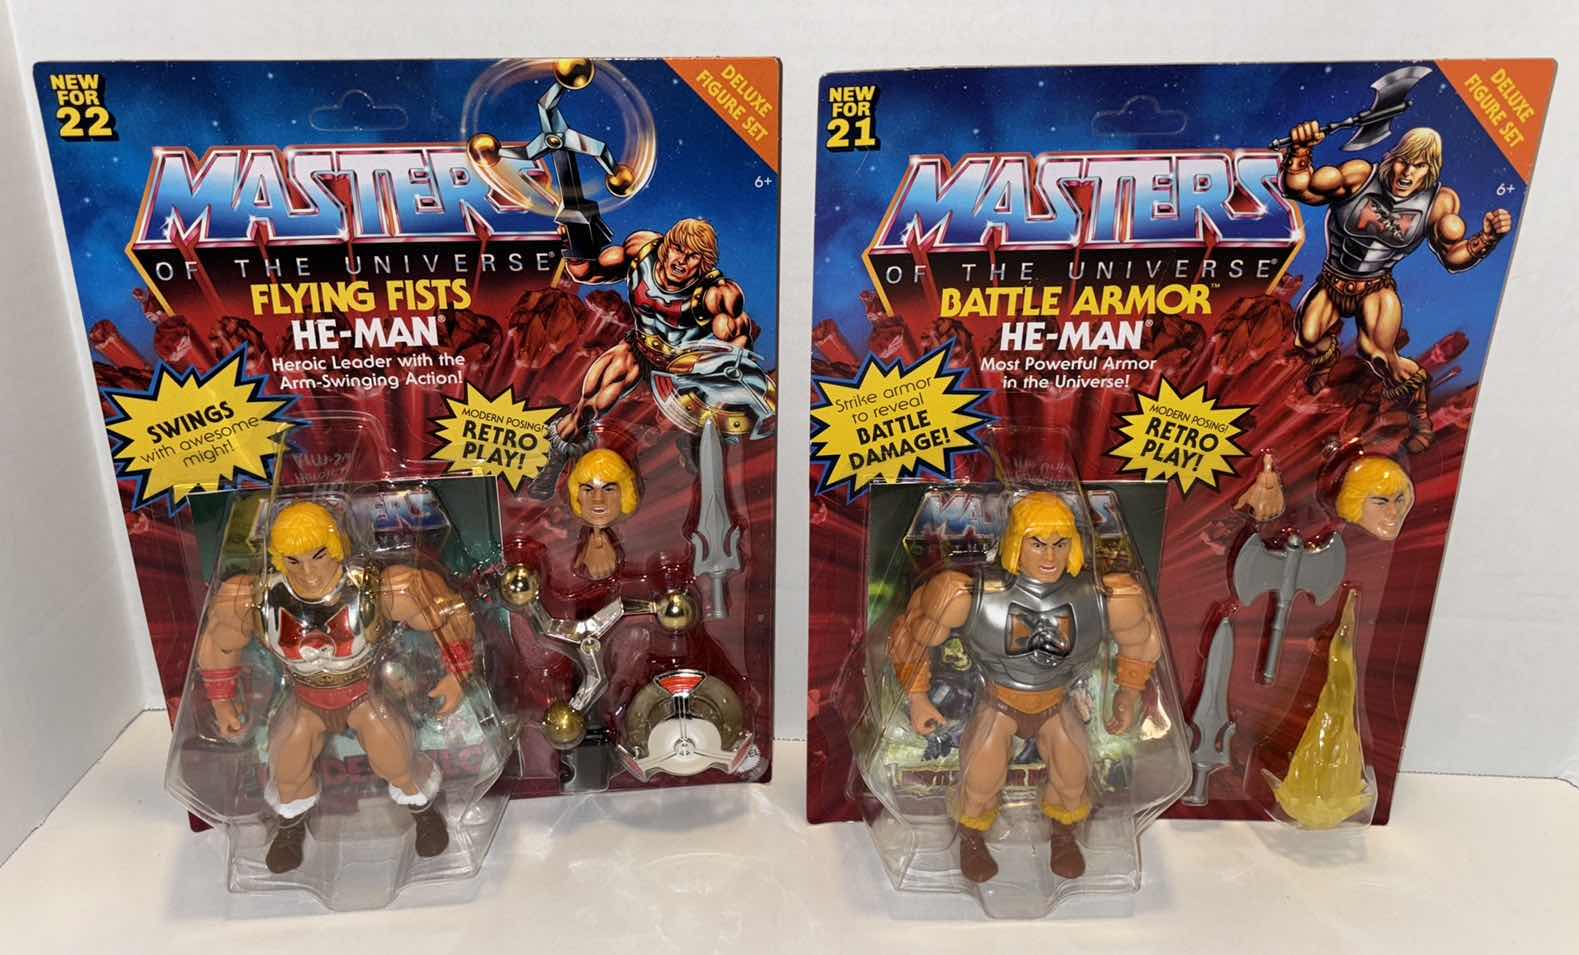 Photo 1 of NEW MATTEL MASTERS OF THE UNIVERSE 2-PACK “FLYING FISTS HE-MAN” & “BATTLE ARMOR HE-MAN” ACTION FIGURES & ACCESSORIES